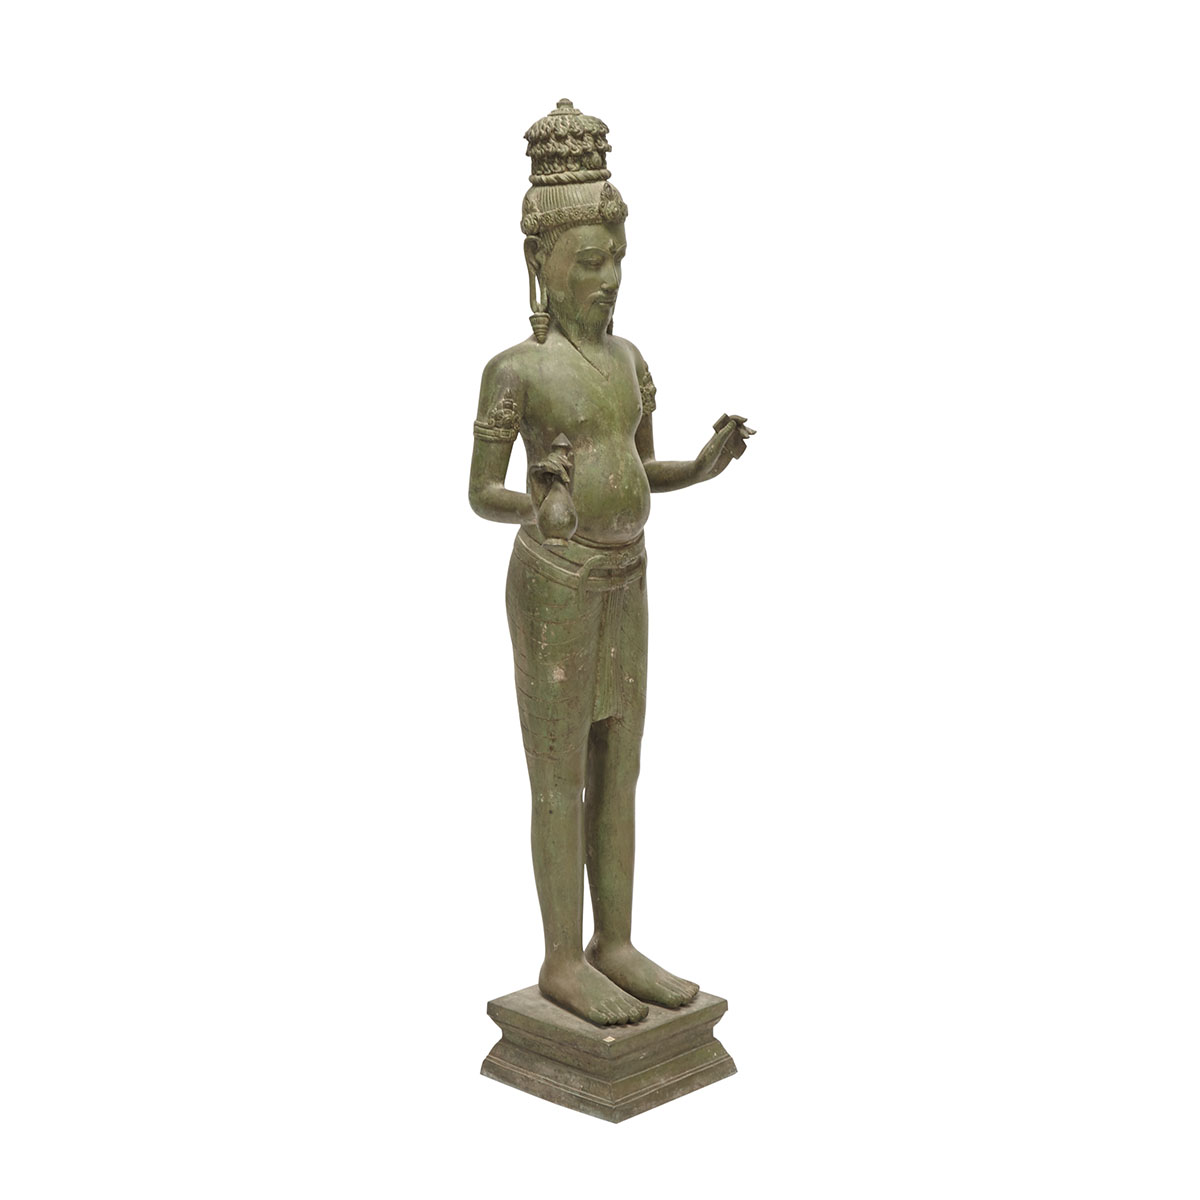 An Unusual Southeast Asian Standing Buddha, Possibly 19th Century or Earlier